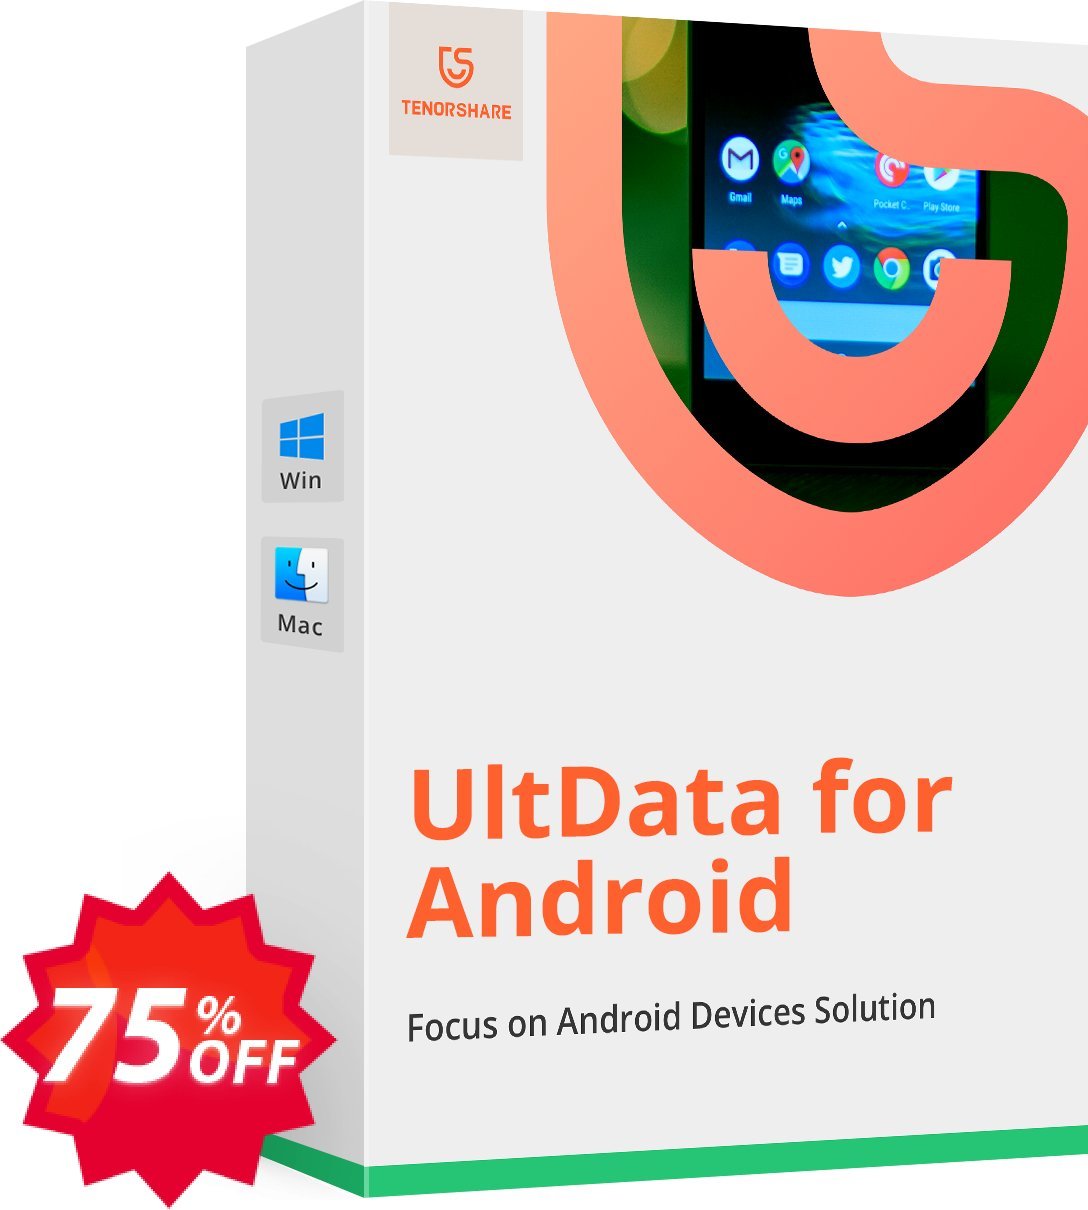 Tenorshare UltData for Android, Yearly Plan  Coupon code 75% discount 